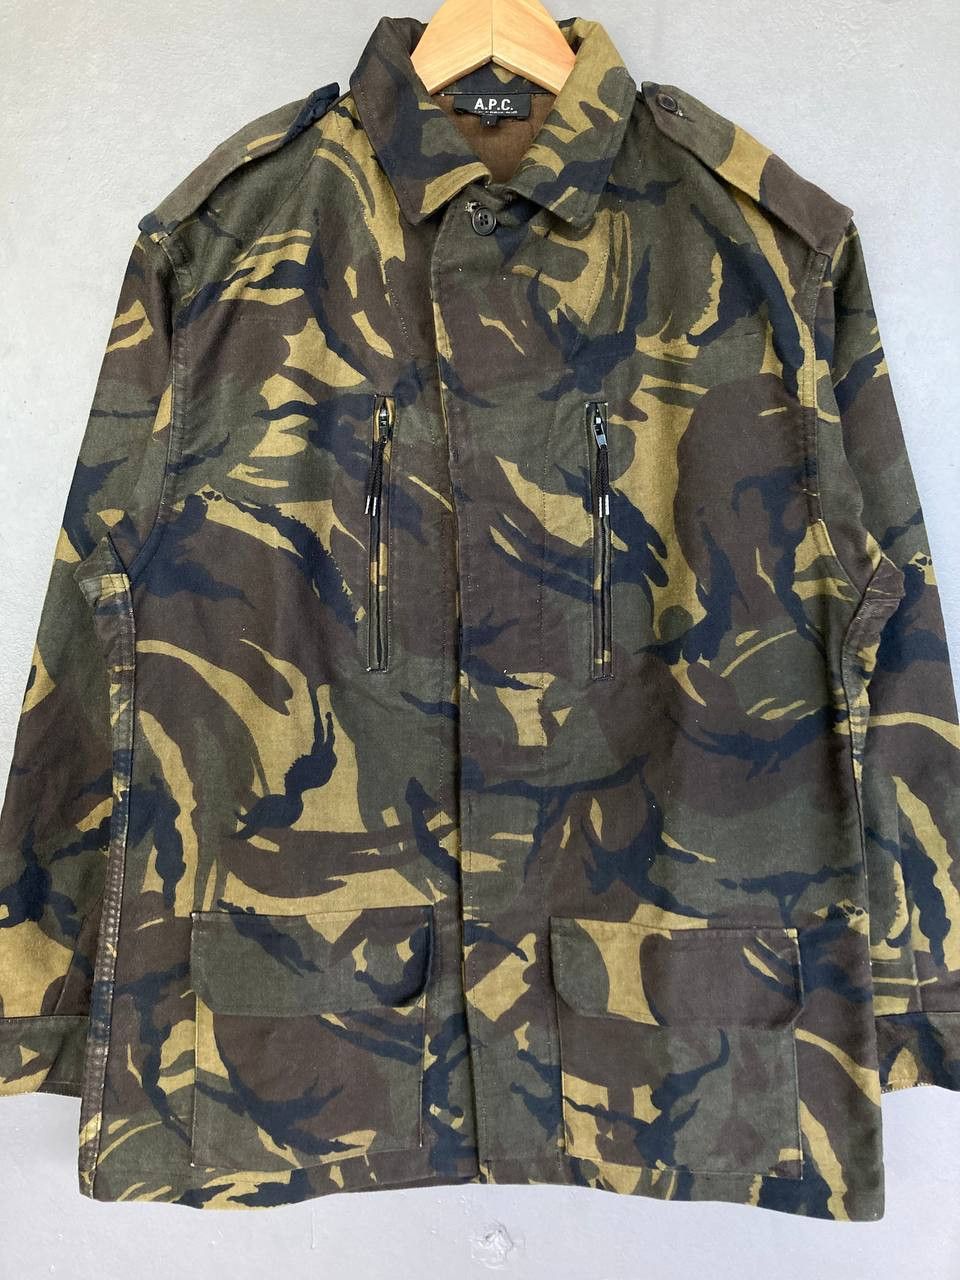 Vintage A.P.C French Military Slim Field Jacket - 3